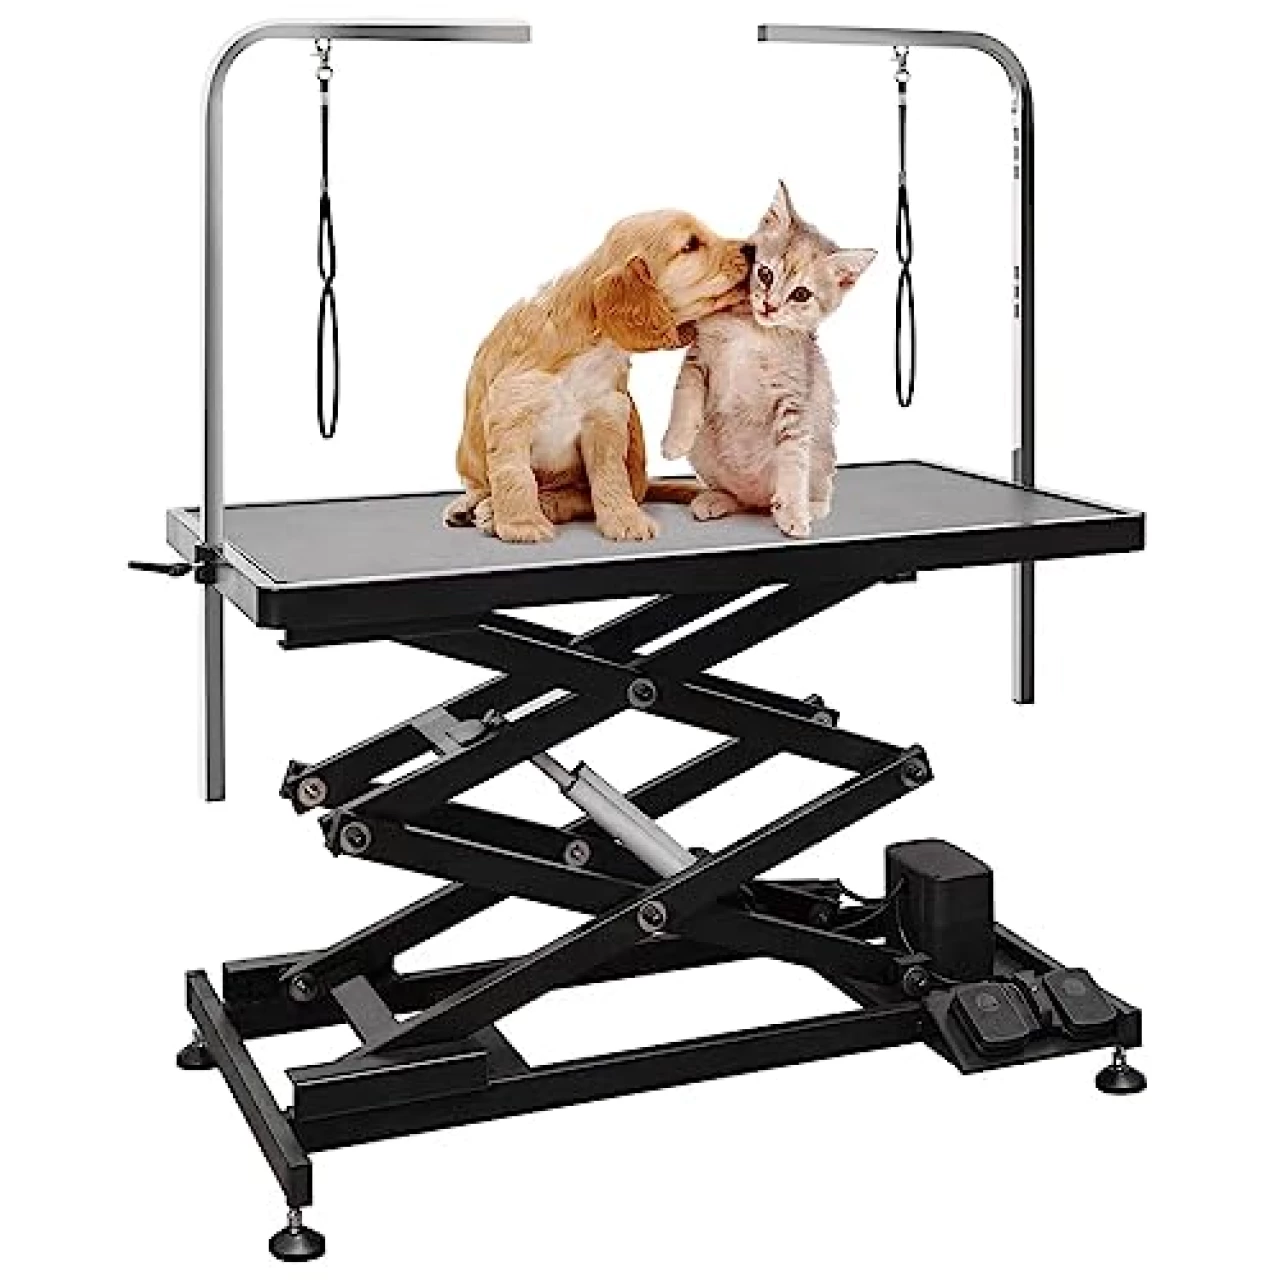 UDSONFY Electric Pet Dog Grooming Table, Heavy Duty Grooming Table Professional Double X-Lift for Large Dogs with Anti-Skid Non-Slip, Double Arms and Nooses, Adjustable Height from 13&quot; up to 47&quot; Black